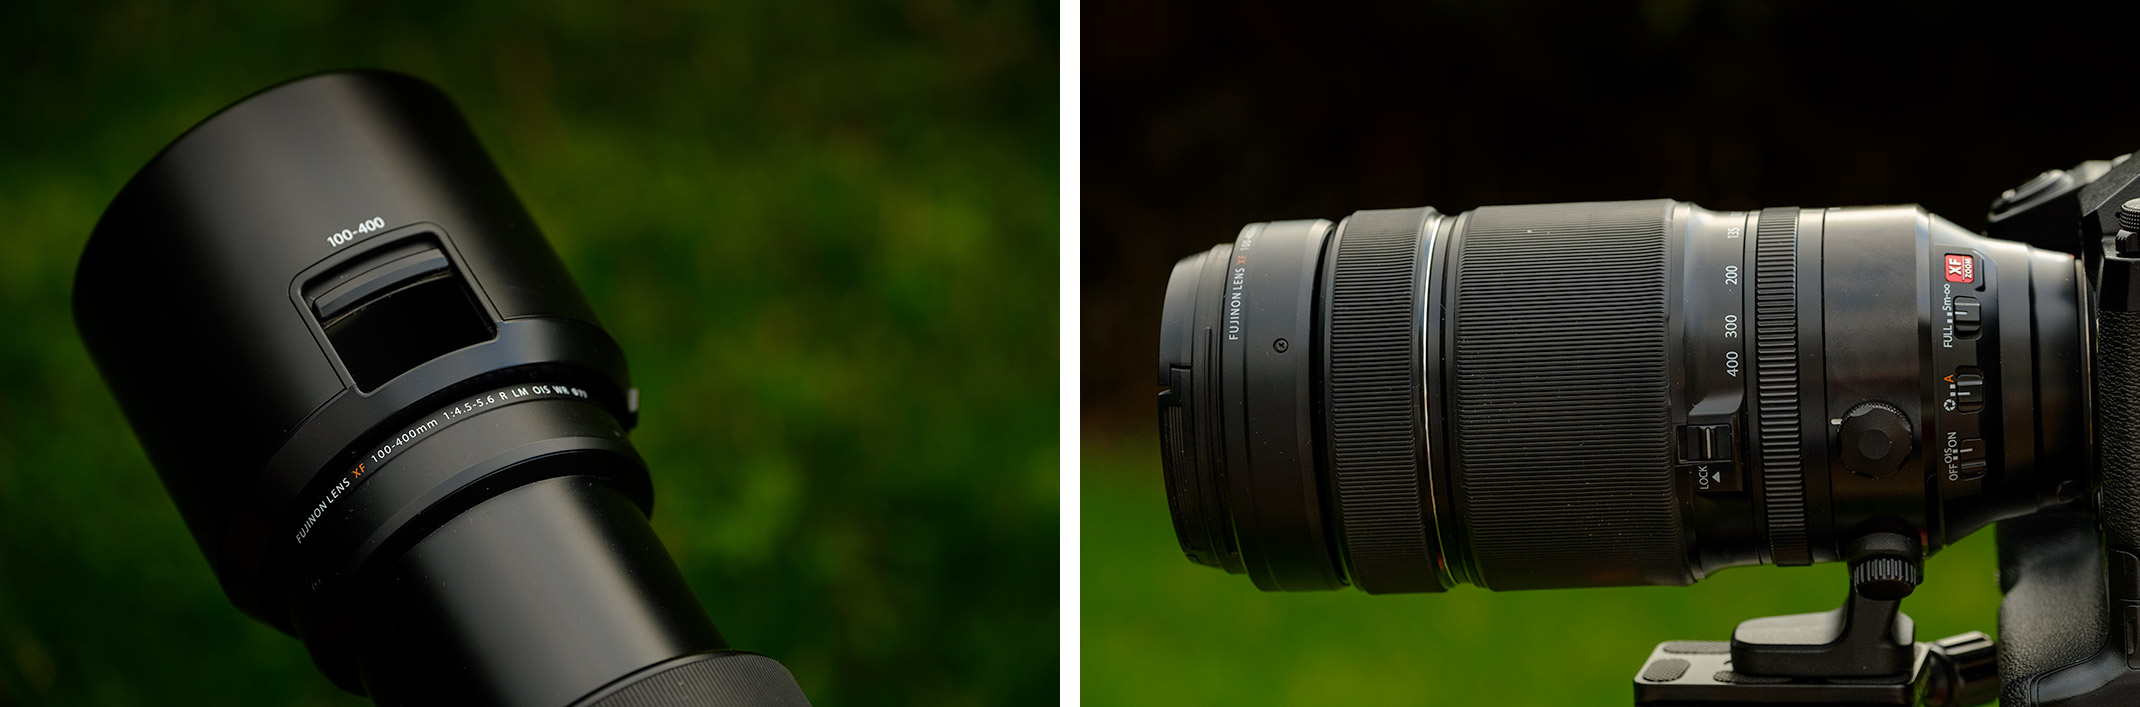 Fujifilm 100-400 f/4.5-5.6 (Left) Lens hood with filter access portal open, (Right) At 100mm without lens hood attached.